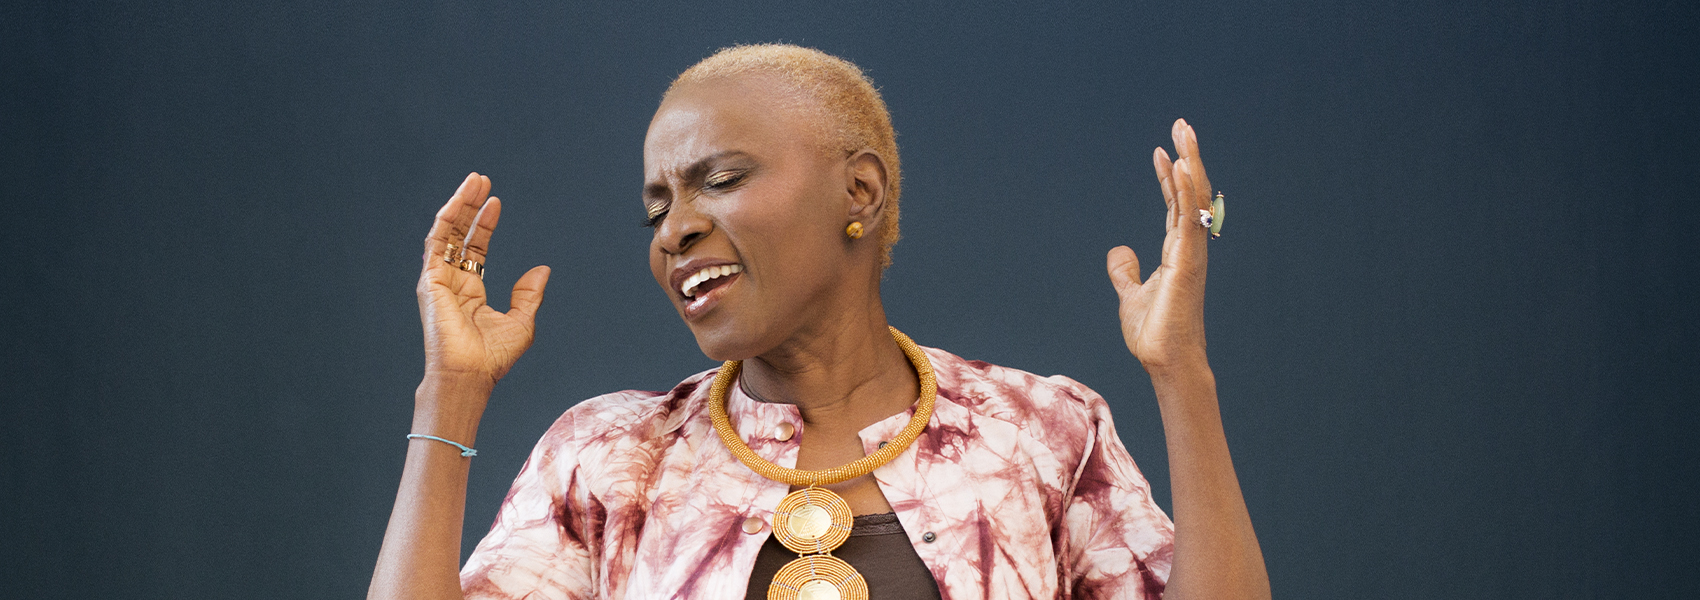 Angelique Kidjo is pictures singing with her eyes closed and her hands raised in the air. 